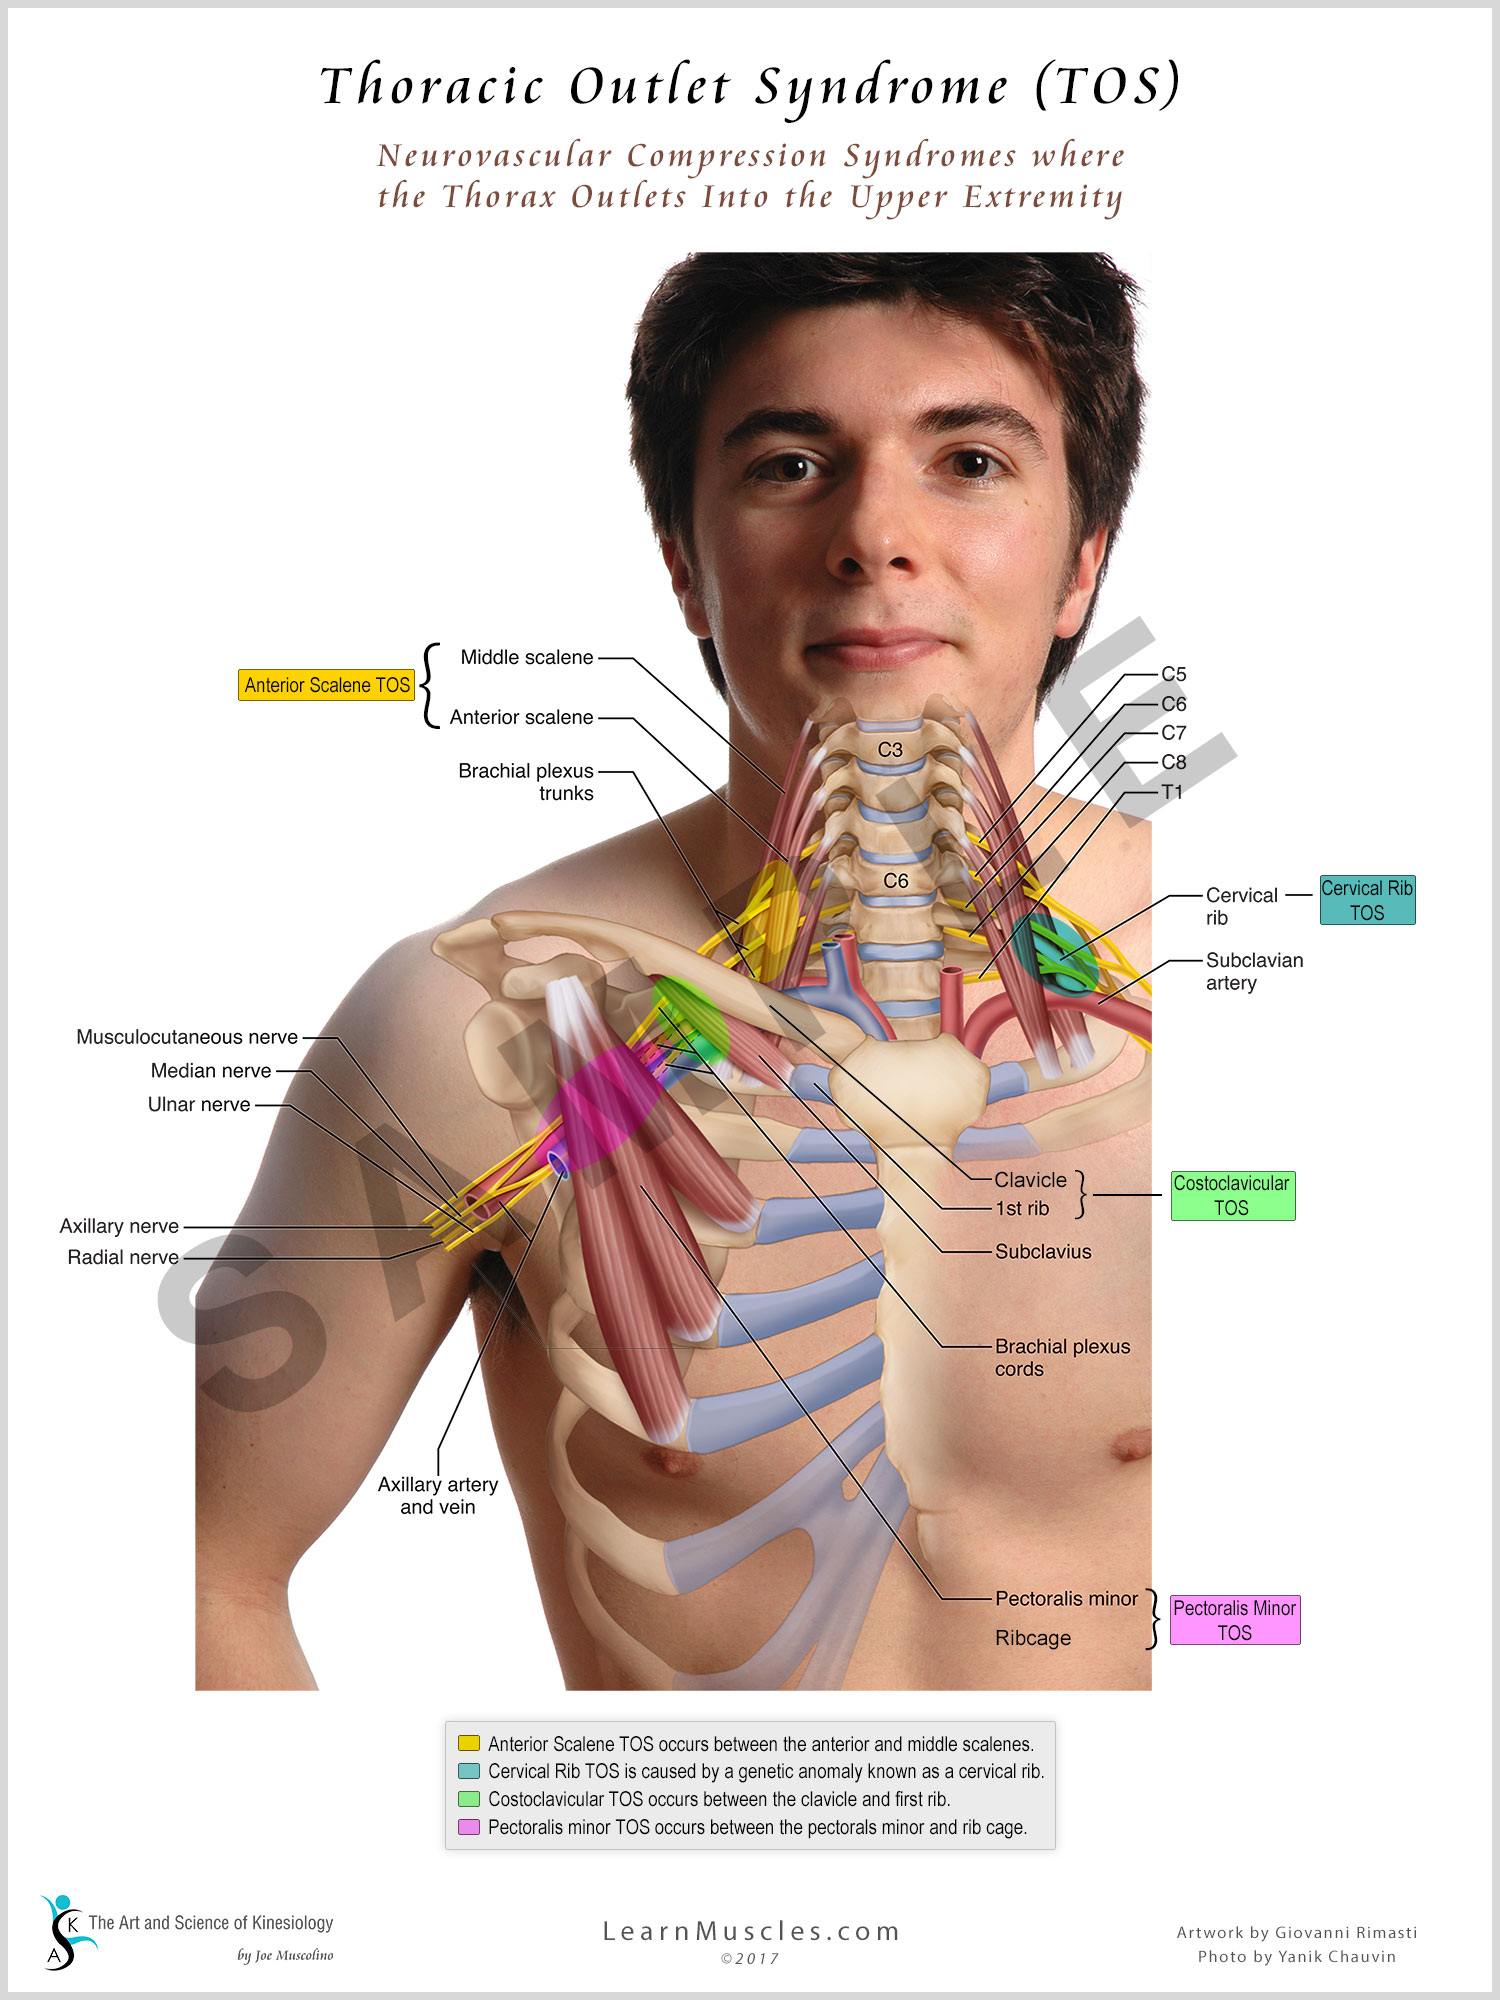 Thoracic Outlet Syndrome 18 x 24 Premium Poster - Learn Muscles